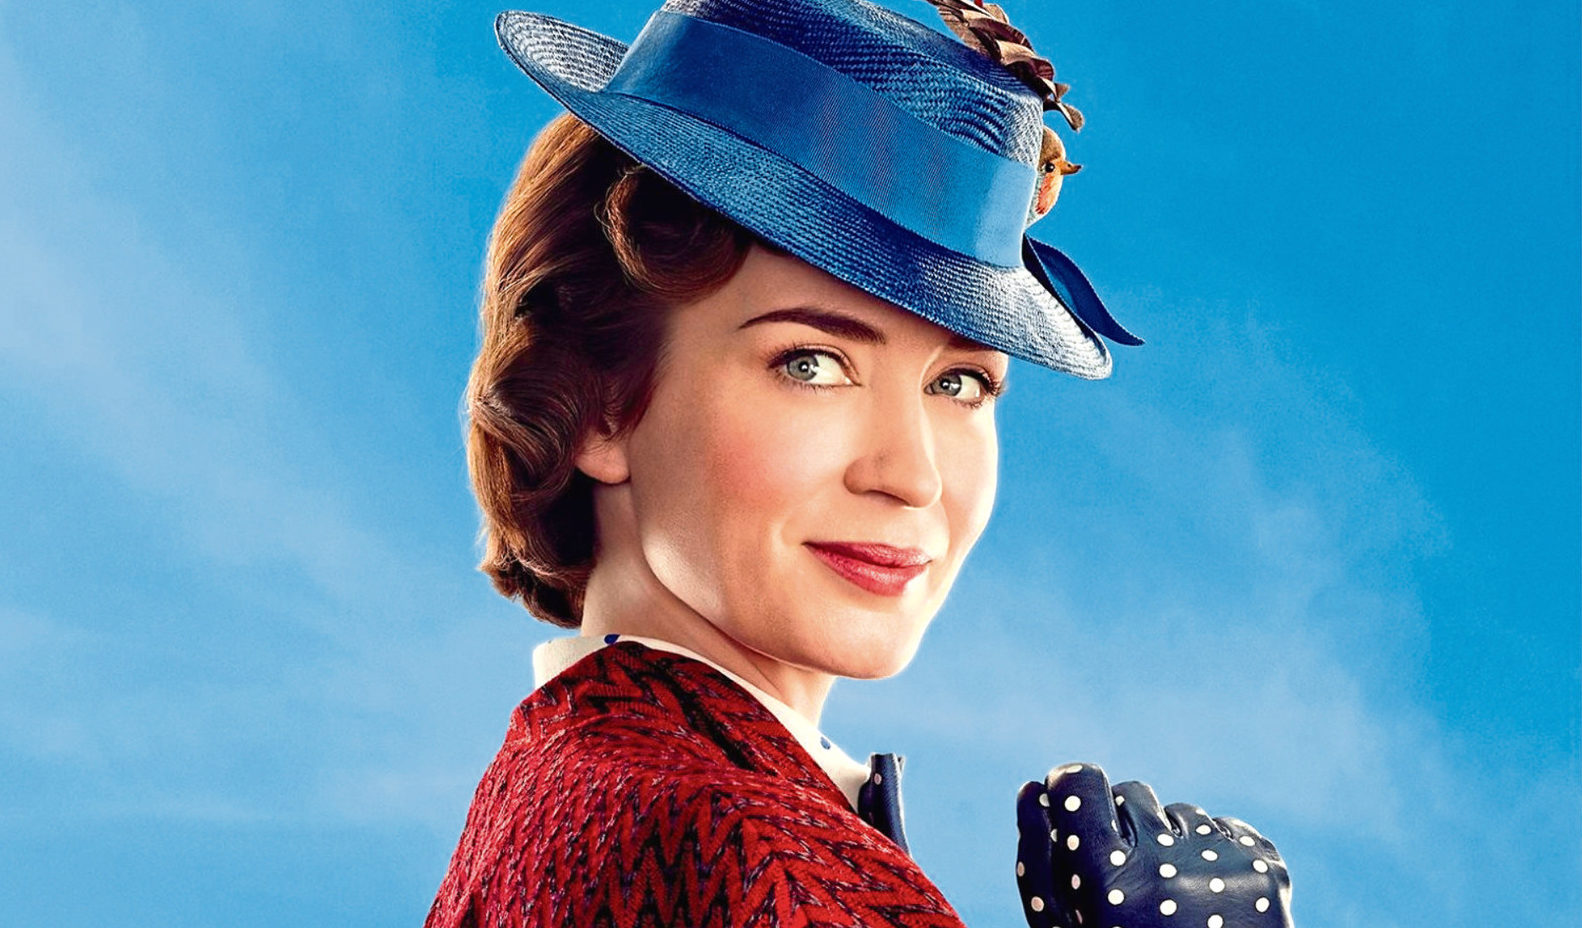 Emily Blunt as Mary Poppins in the remake of the film. (All Star/Walt Disney)